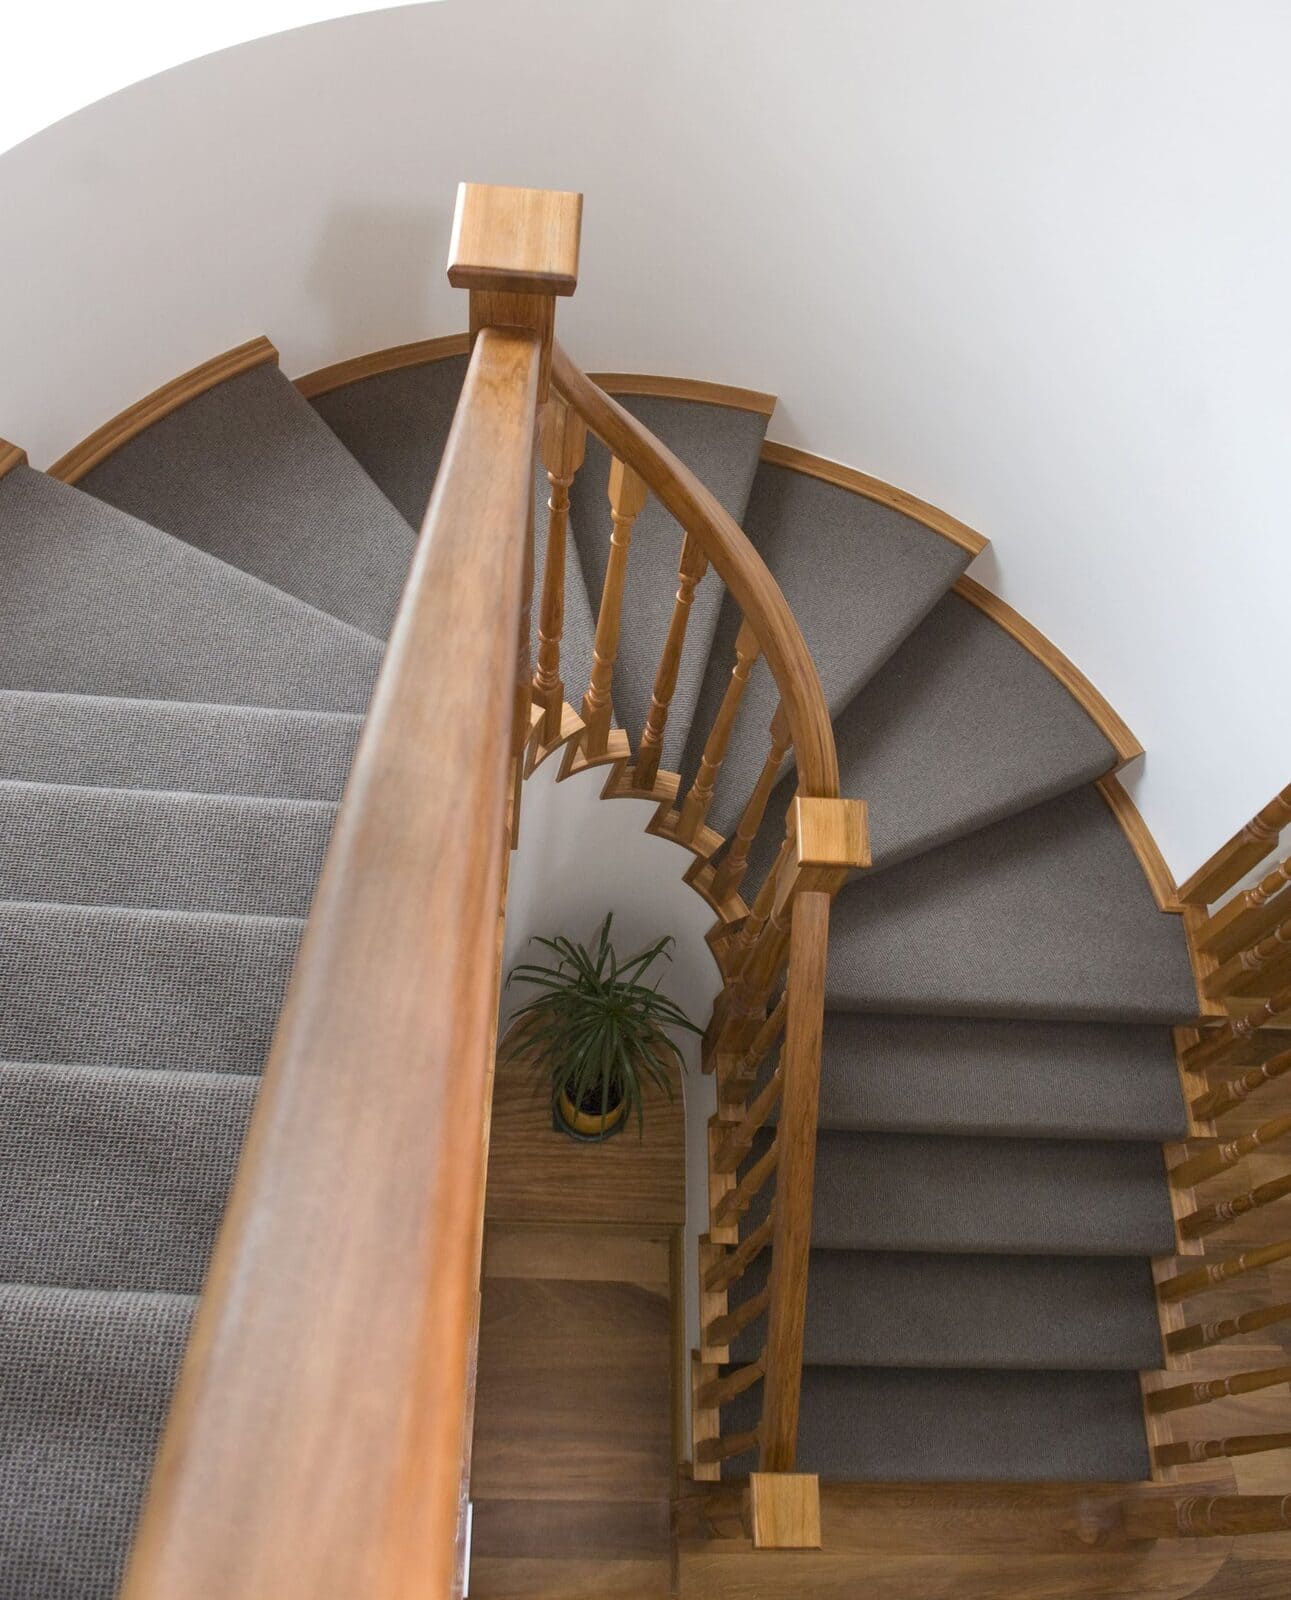 staircases and balustrades